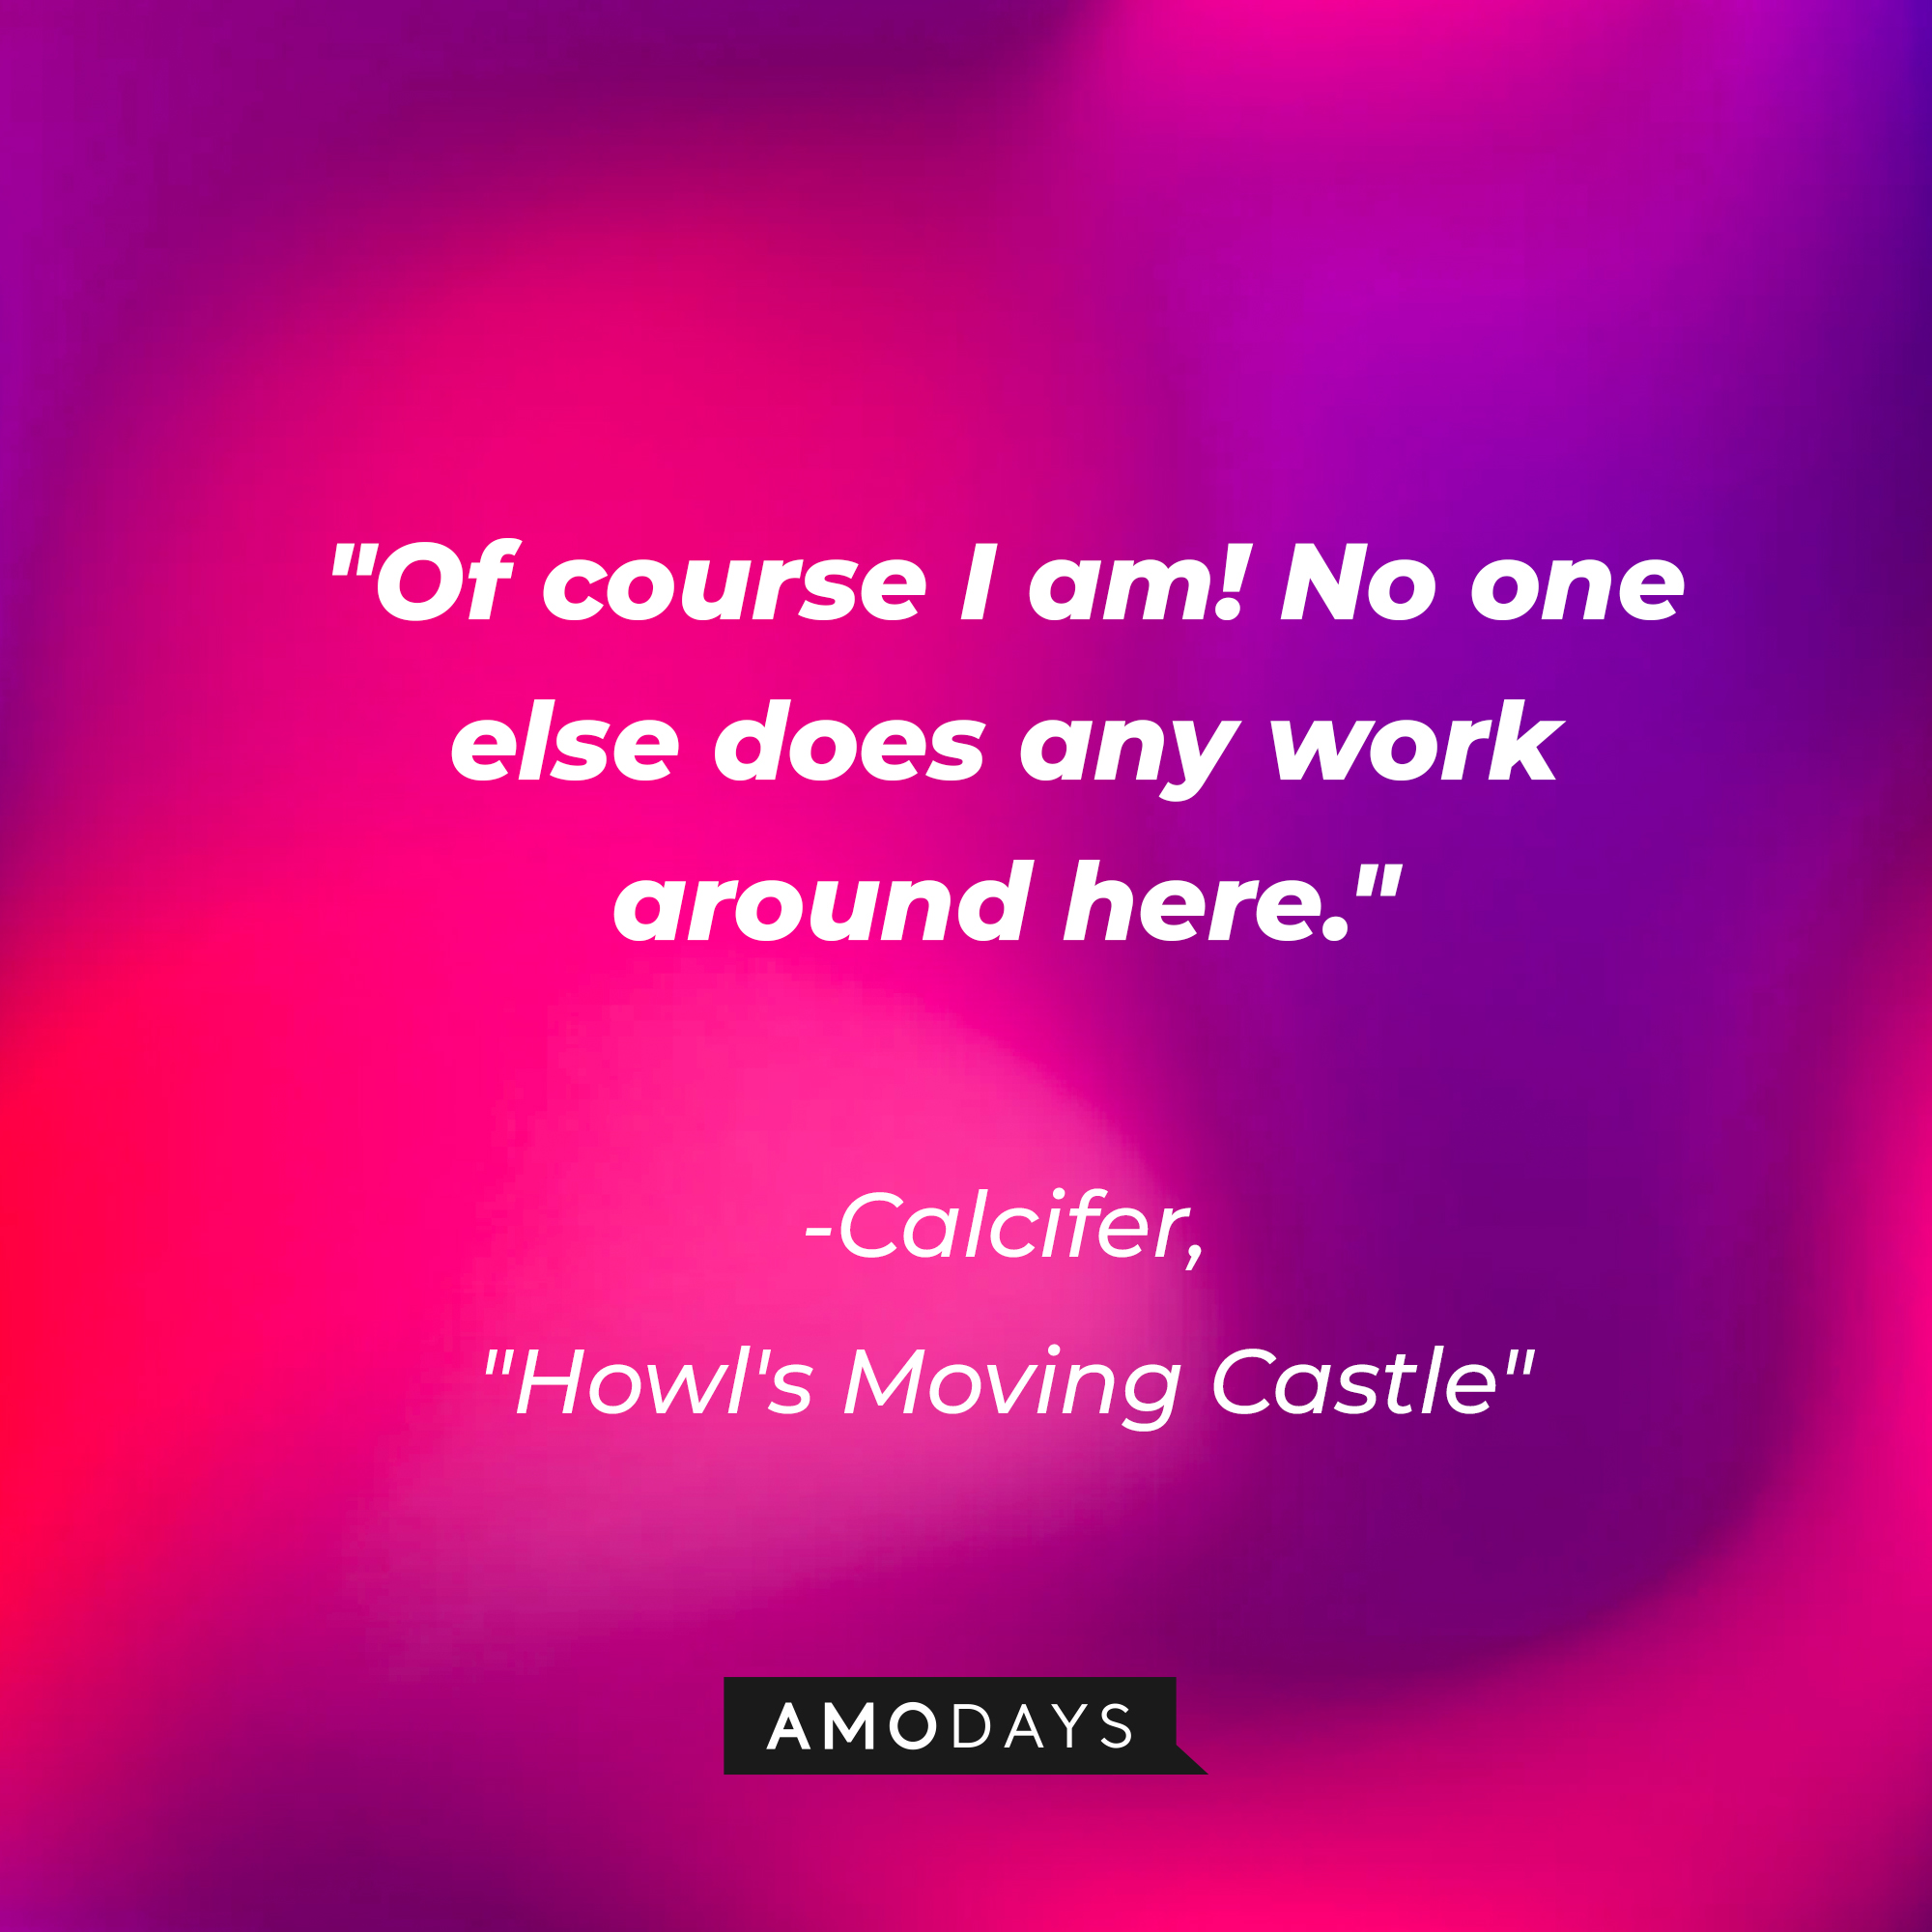 Calcifer's quote in "Howl's Moving Castle:" "Of course I am! No one else does any work around here." | Source: AmoDays